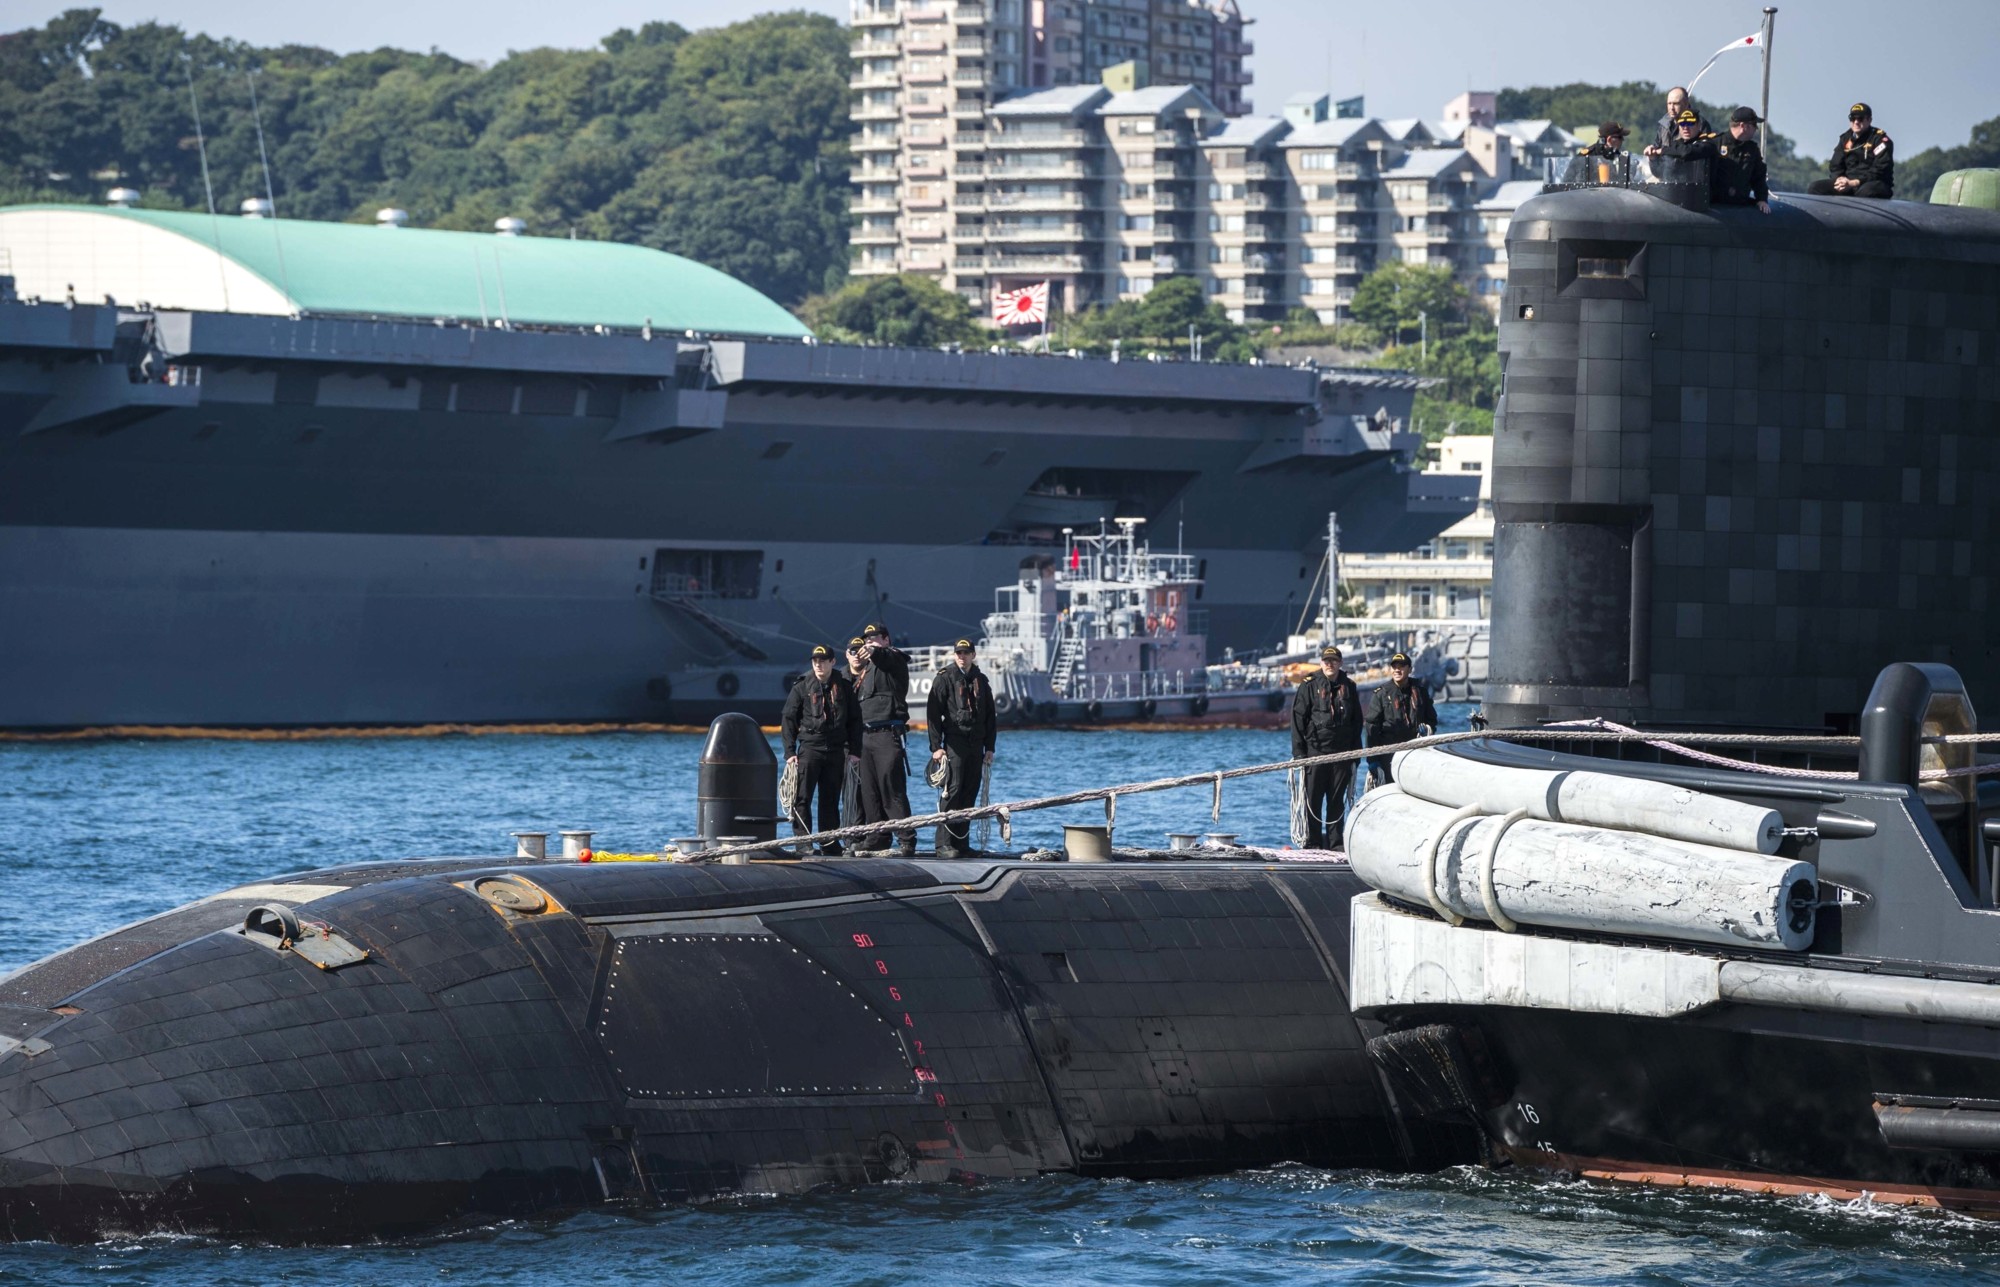 ssk-879 hmcs chicoutimi victoria upholder class patrol submarine ncsm royal canadian navy 09